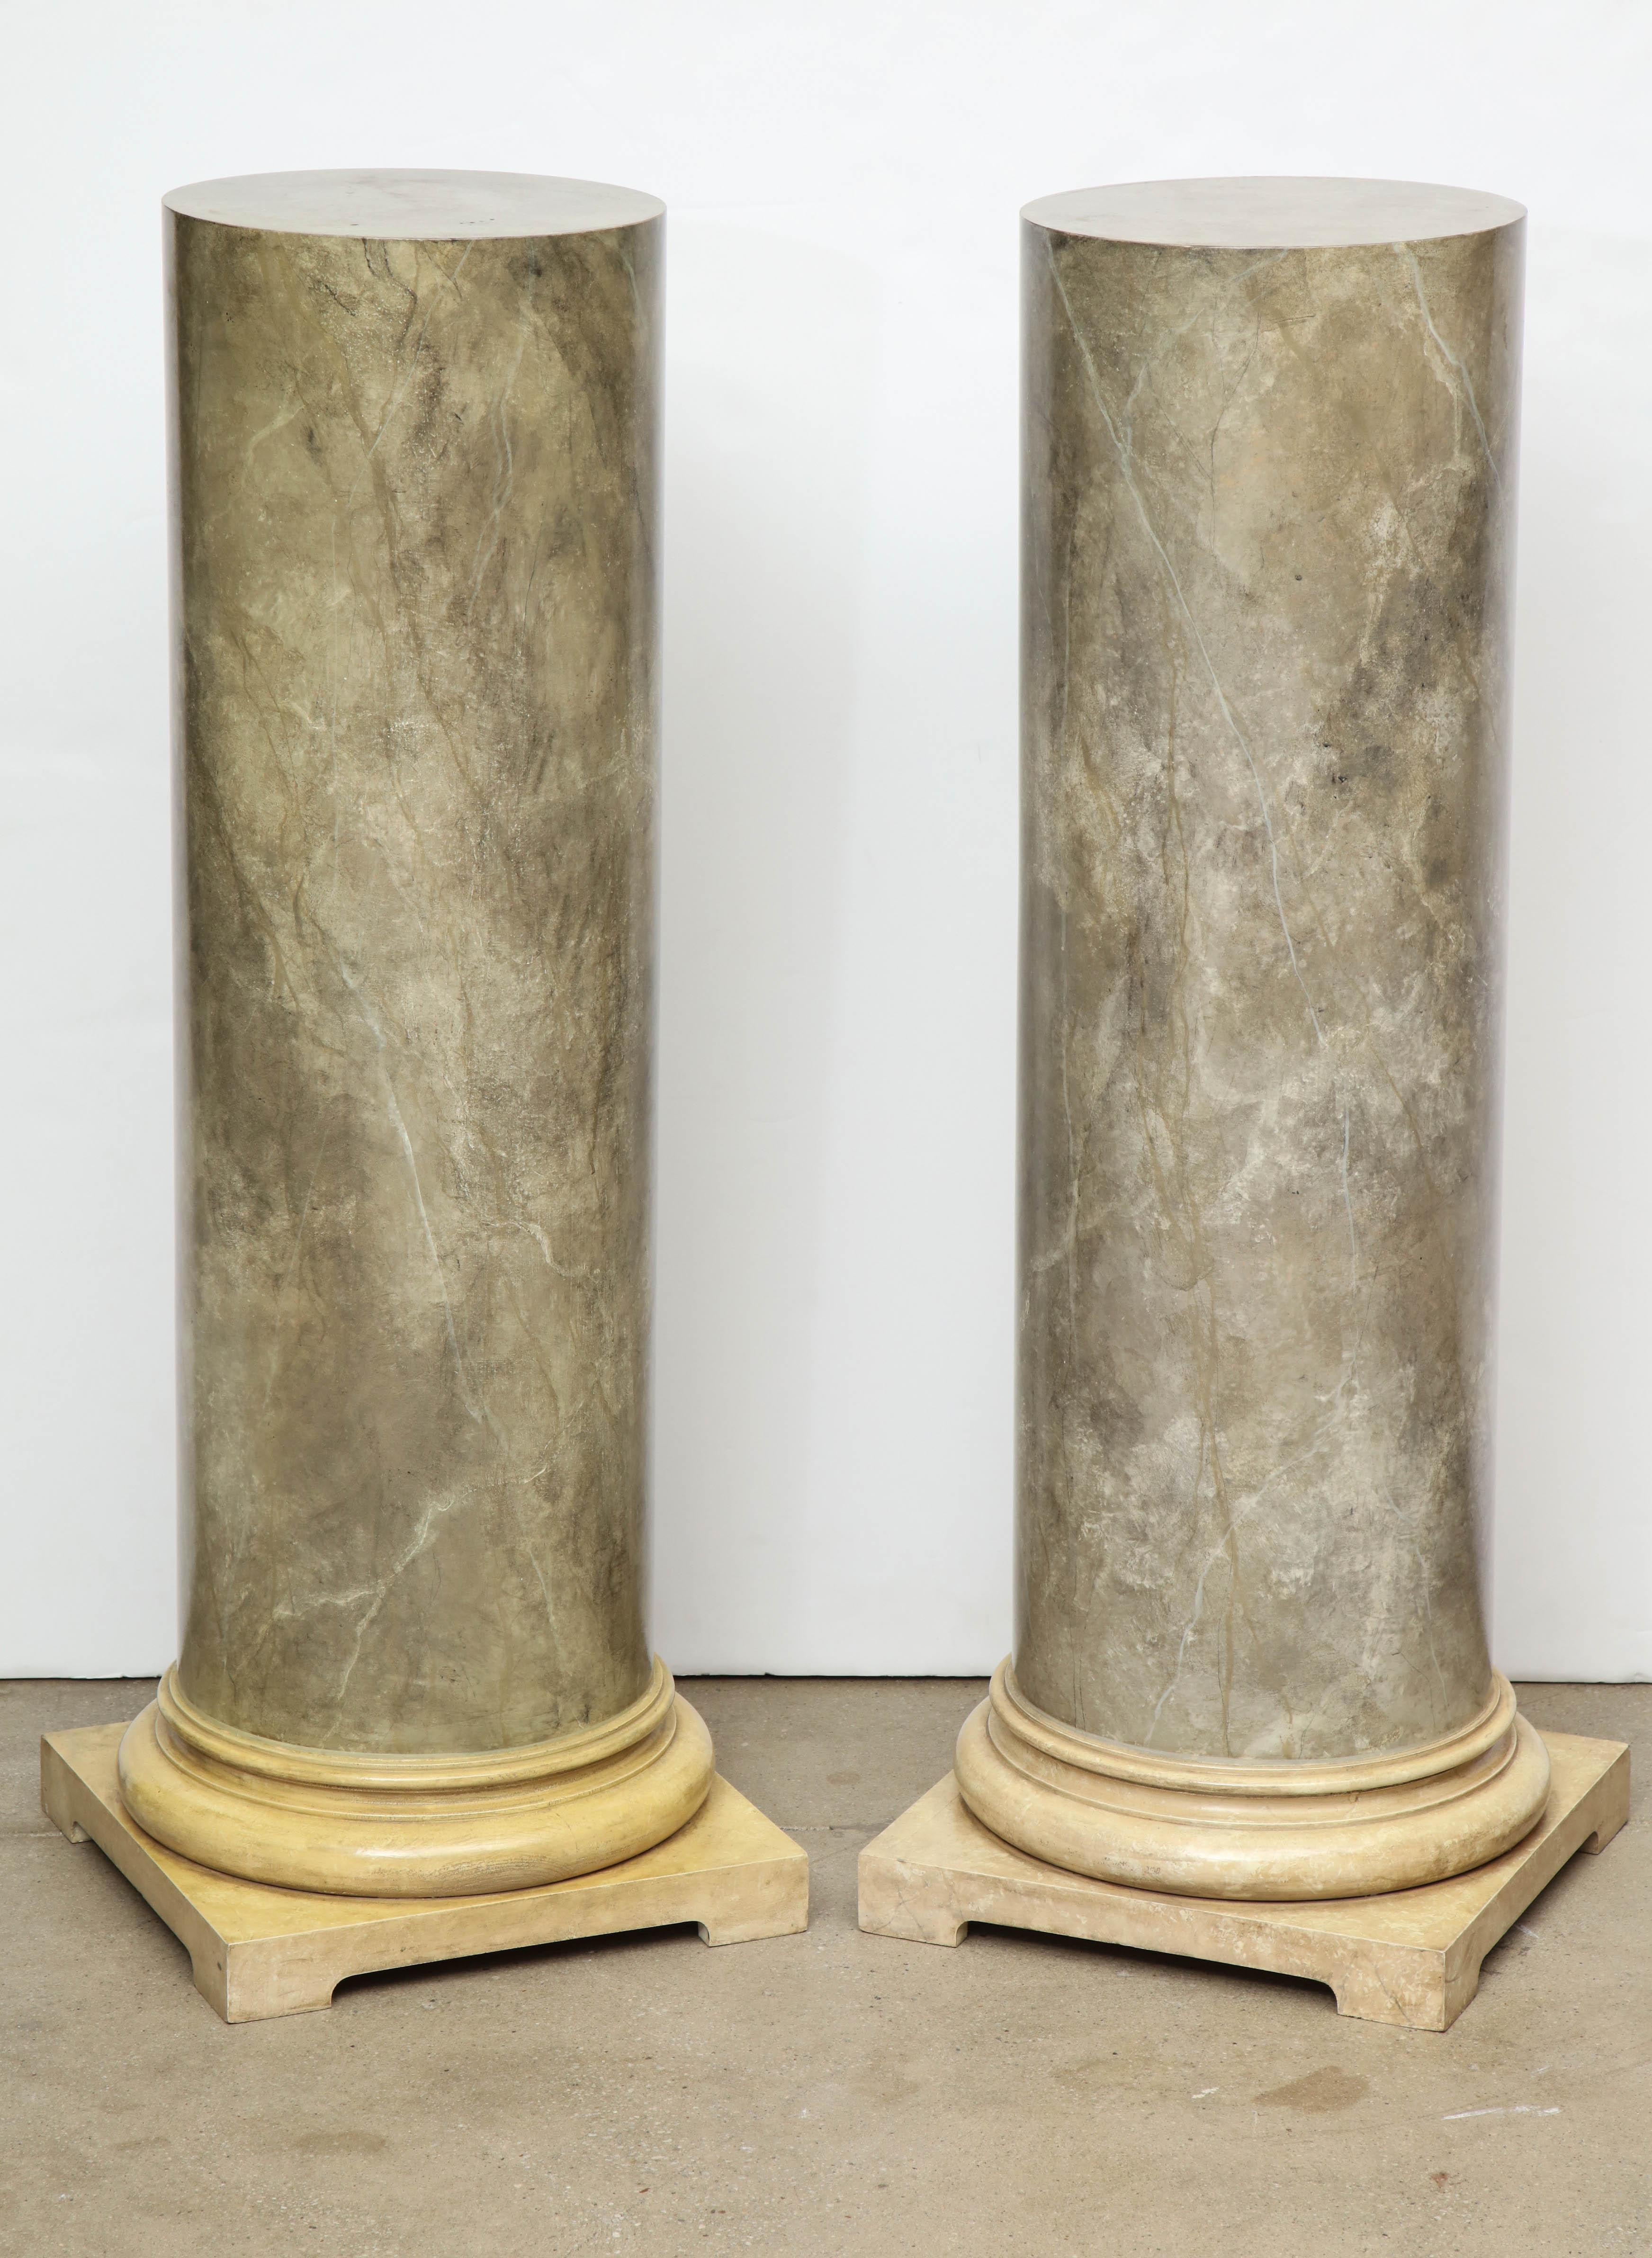 These Classic column pedestals have a faux marble finish in a gray/green color on a cream color base. Perfect pieces to display a sculpture or plant, or to add architectural interest to a space.